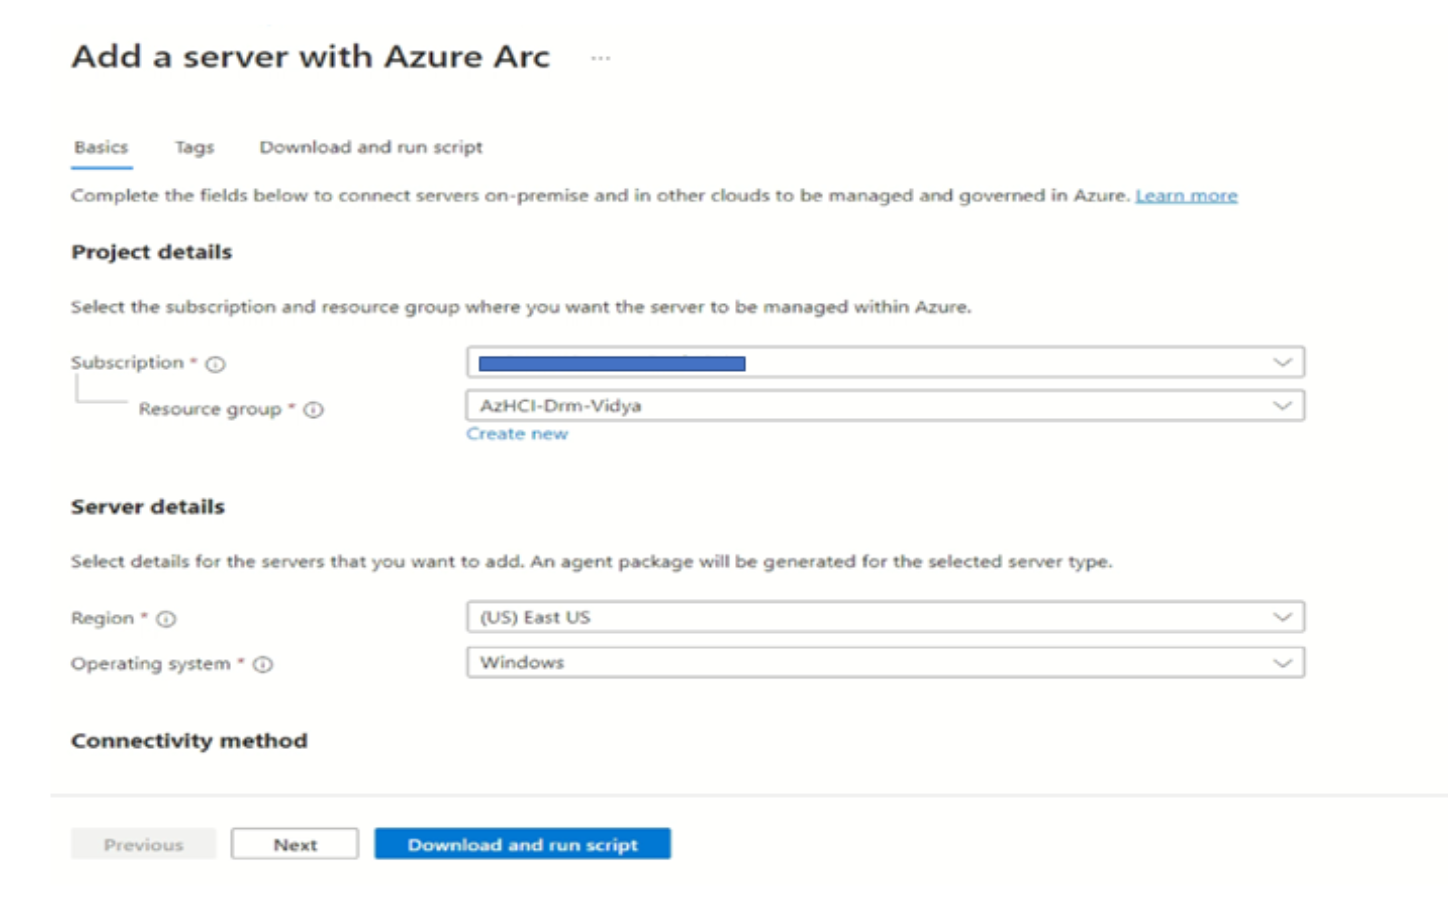 This shows the dashboard view for adding a server with Azure Arc